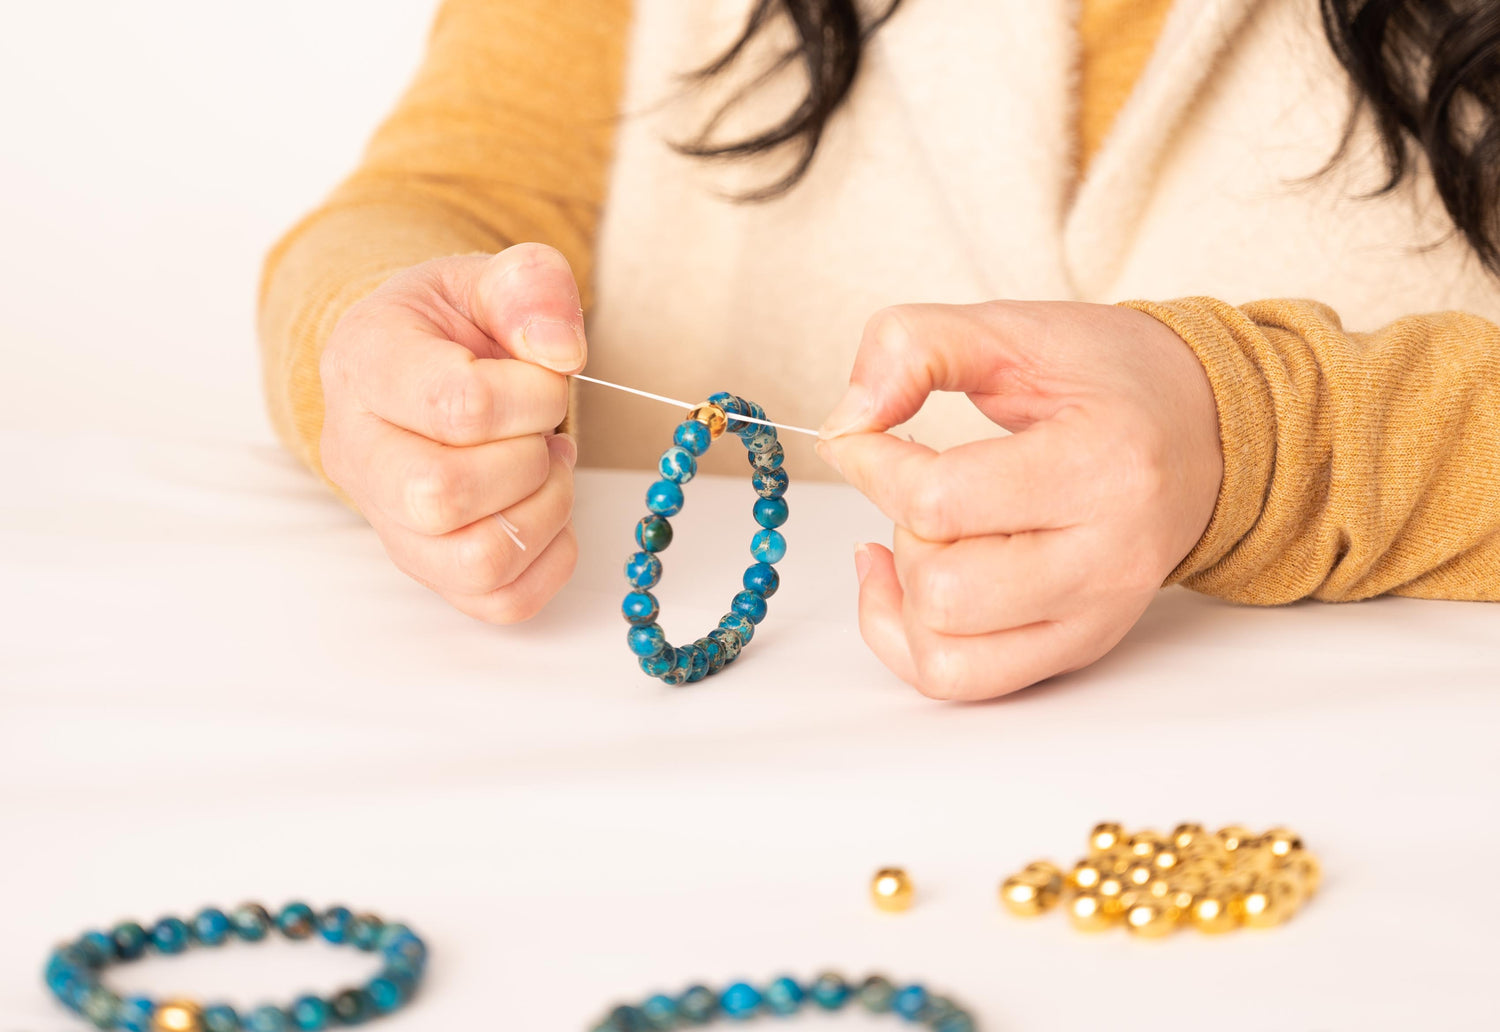 Women's hands creating bracelets for employee gifting. 